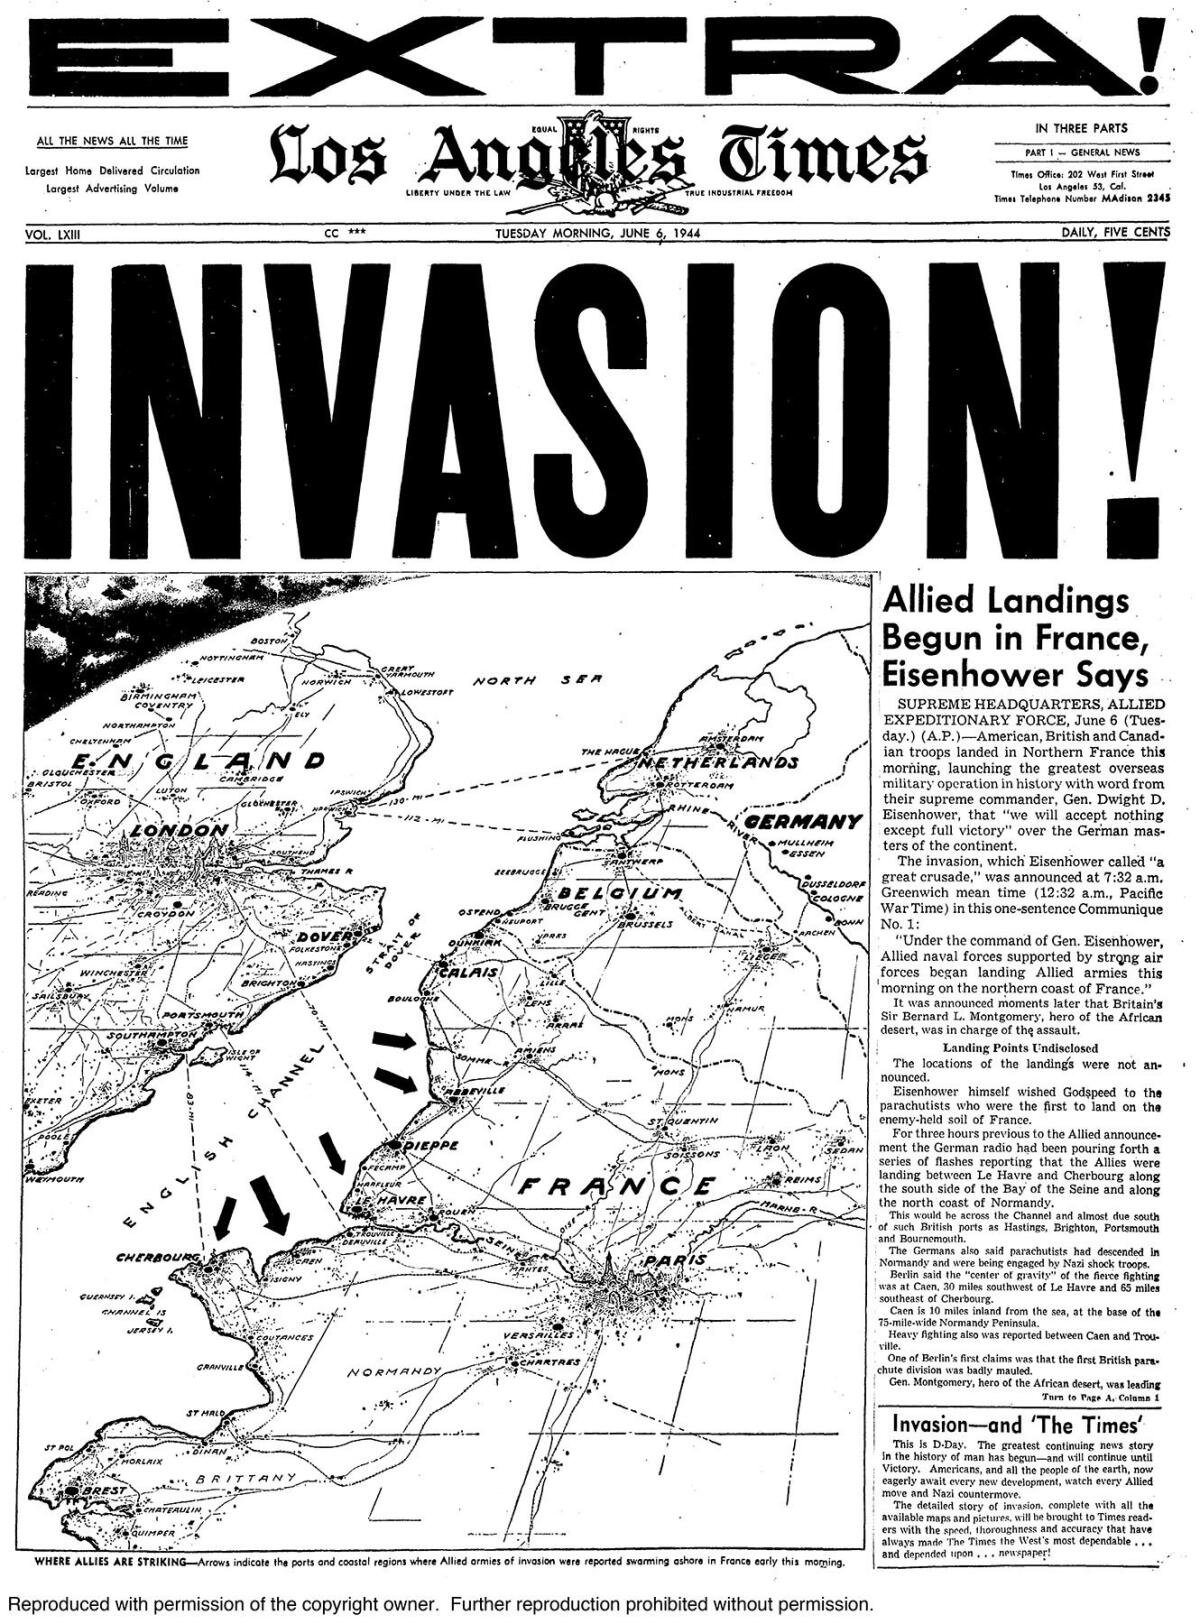 June 6, 1944: A special edition of the Los Angeles Times announces the invsion of France.